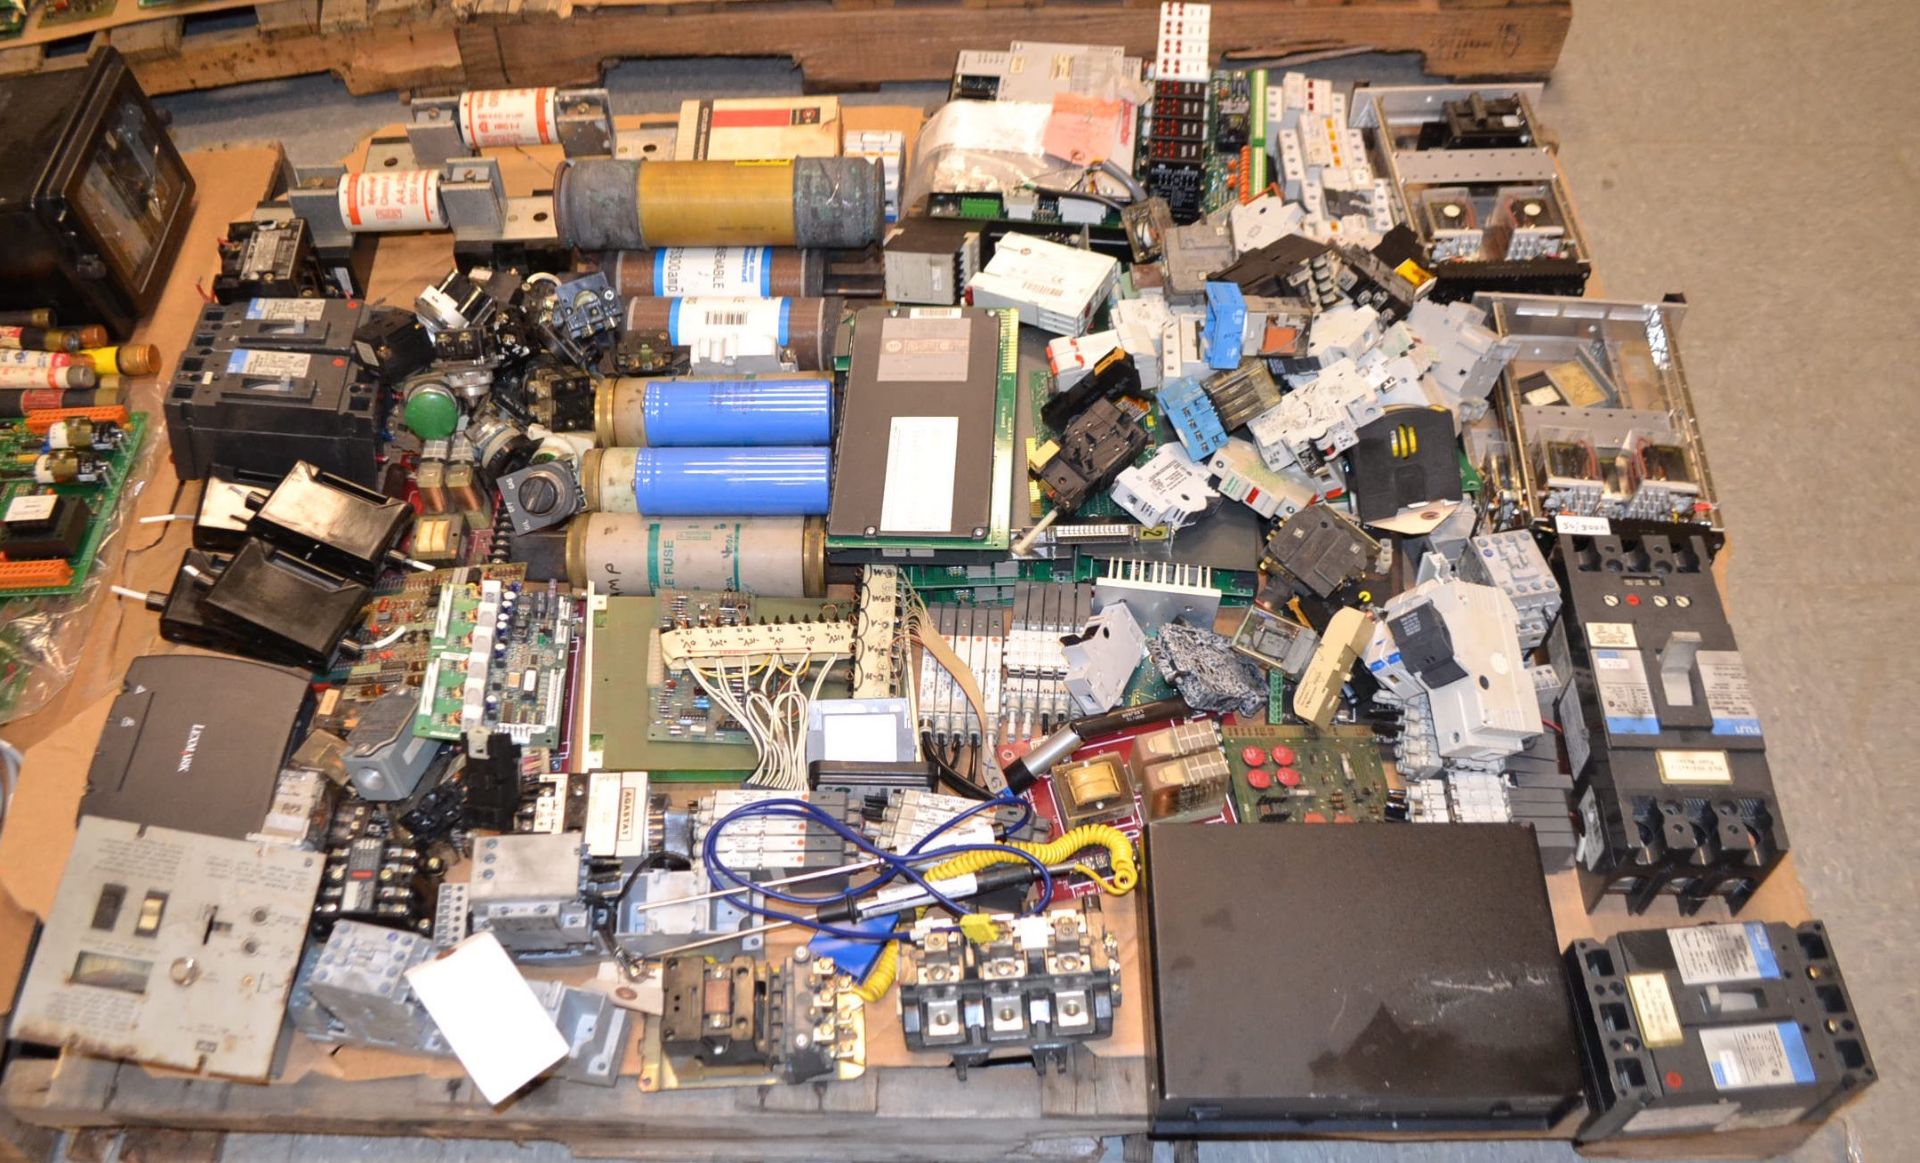 LOT OF ELECTRONICS AND CONTROL FROM ELECTRICAL SPARES SHOP - Image 2 of 4